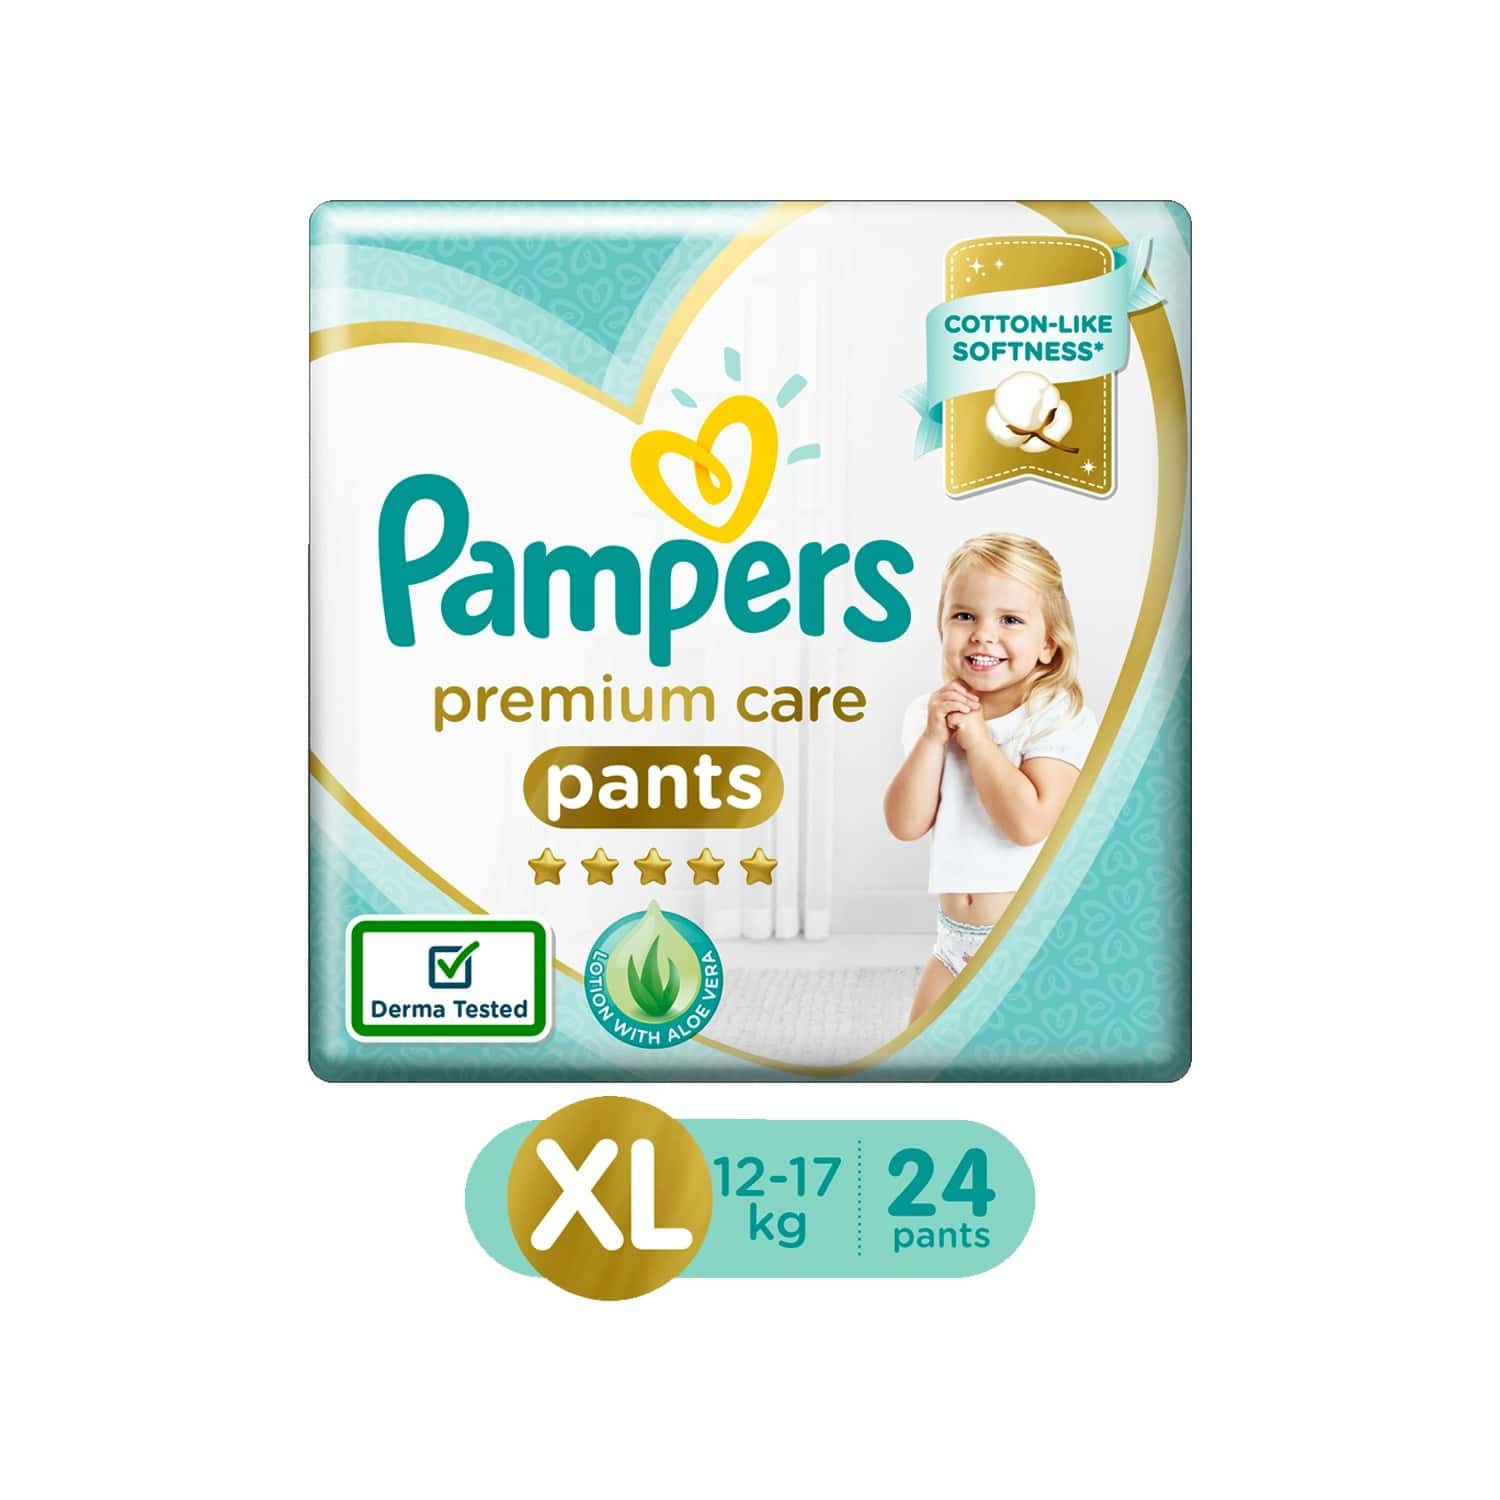 Pampers diaper pants touch M size (6-12 kg) (66 pieces x 4 packs) Unisex  P&G | eBay